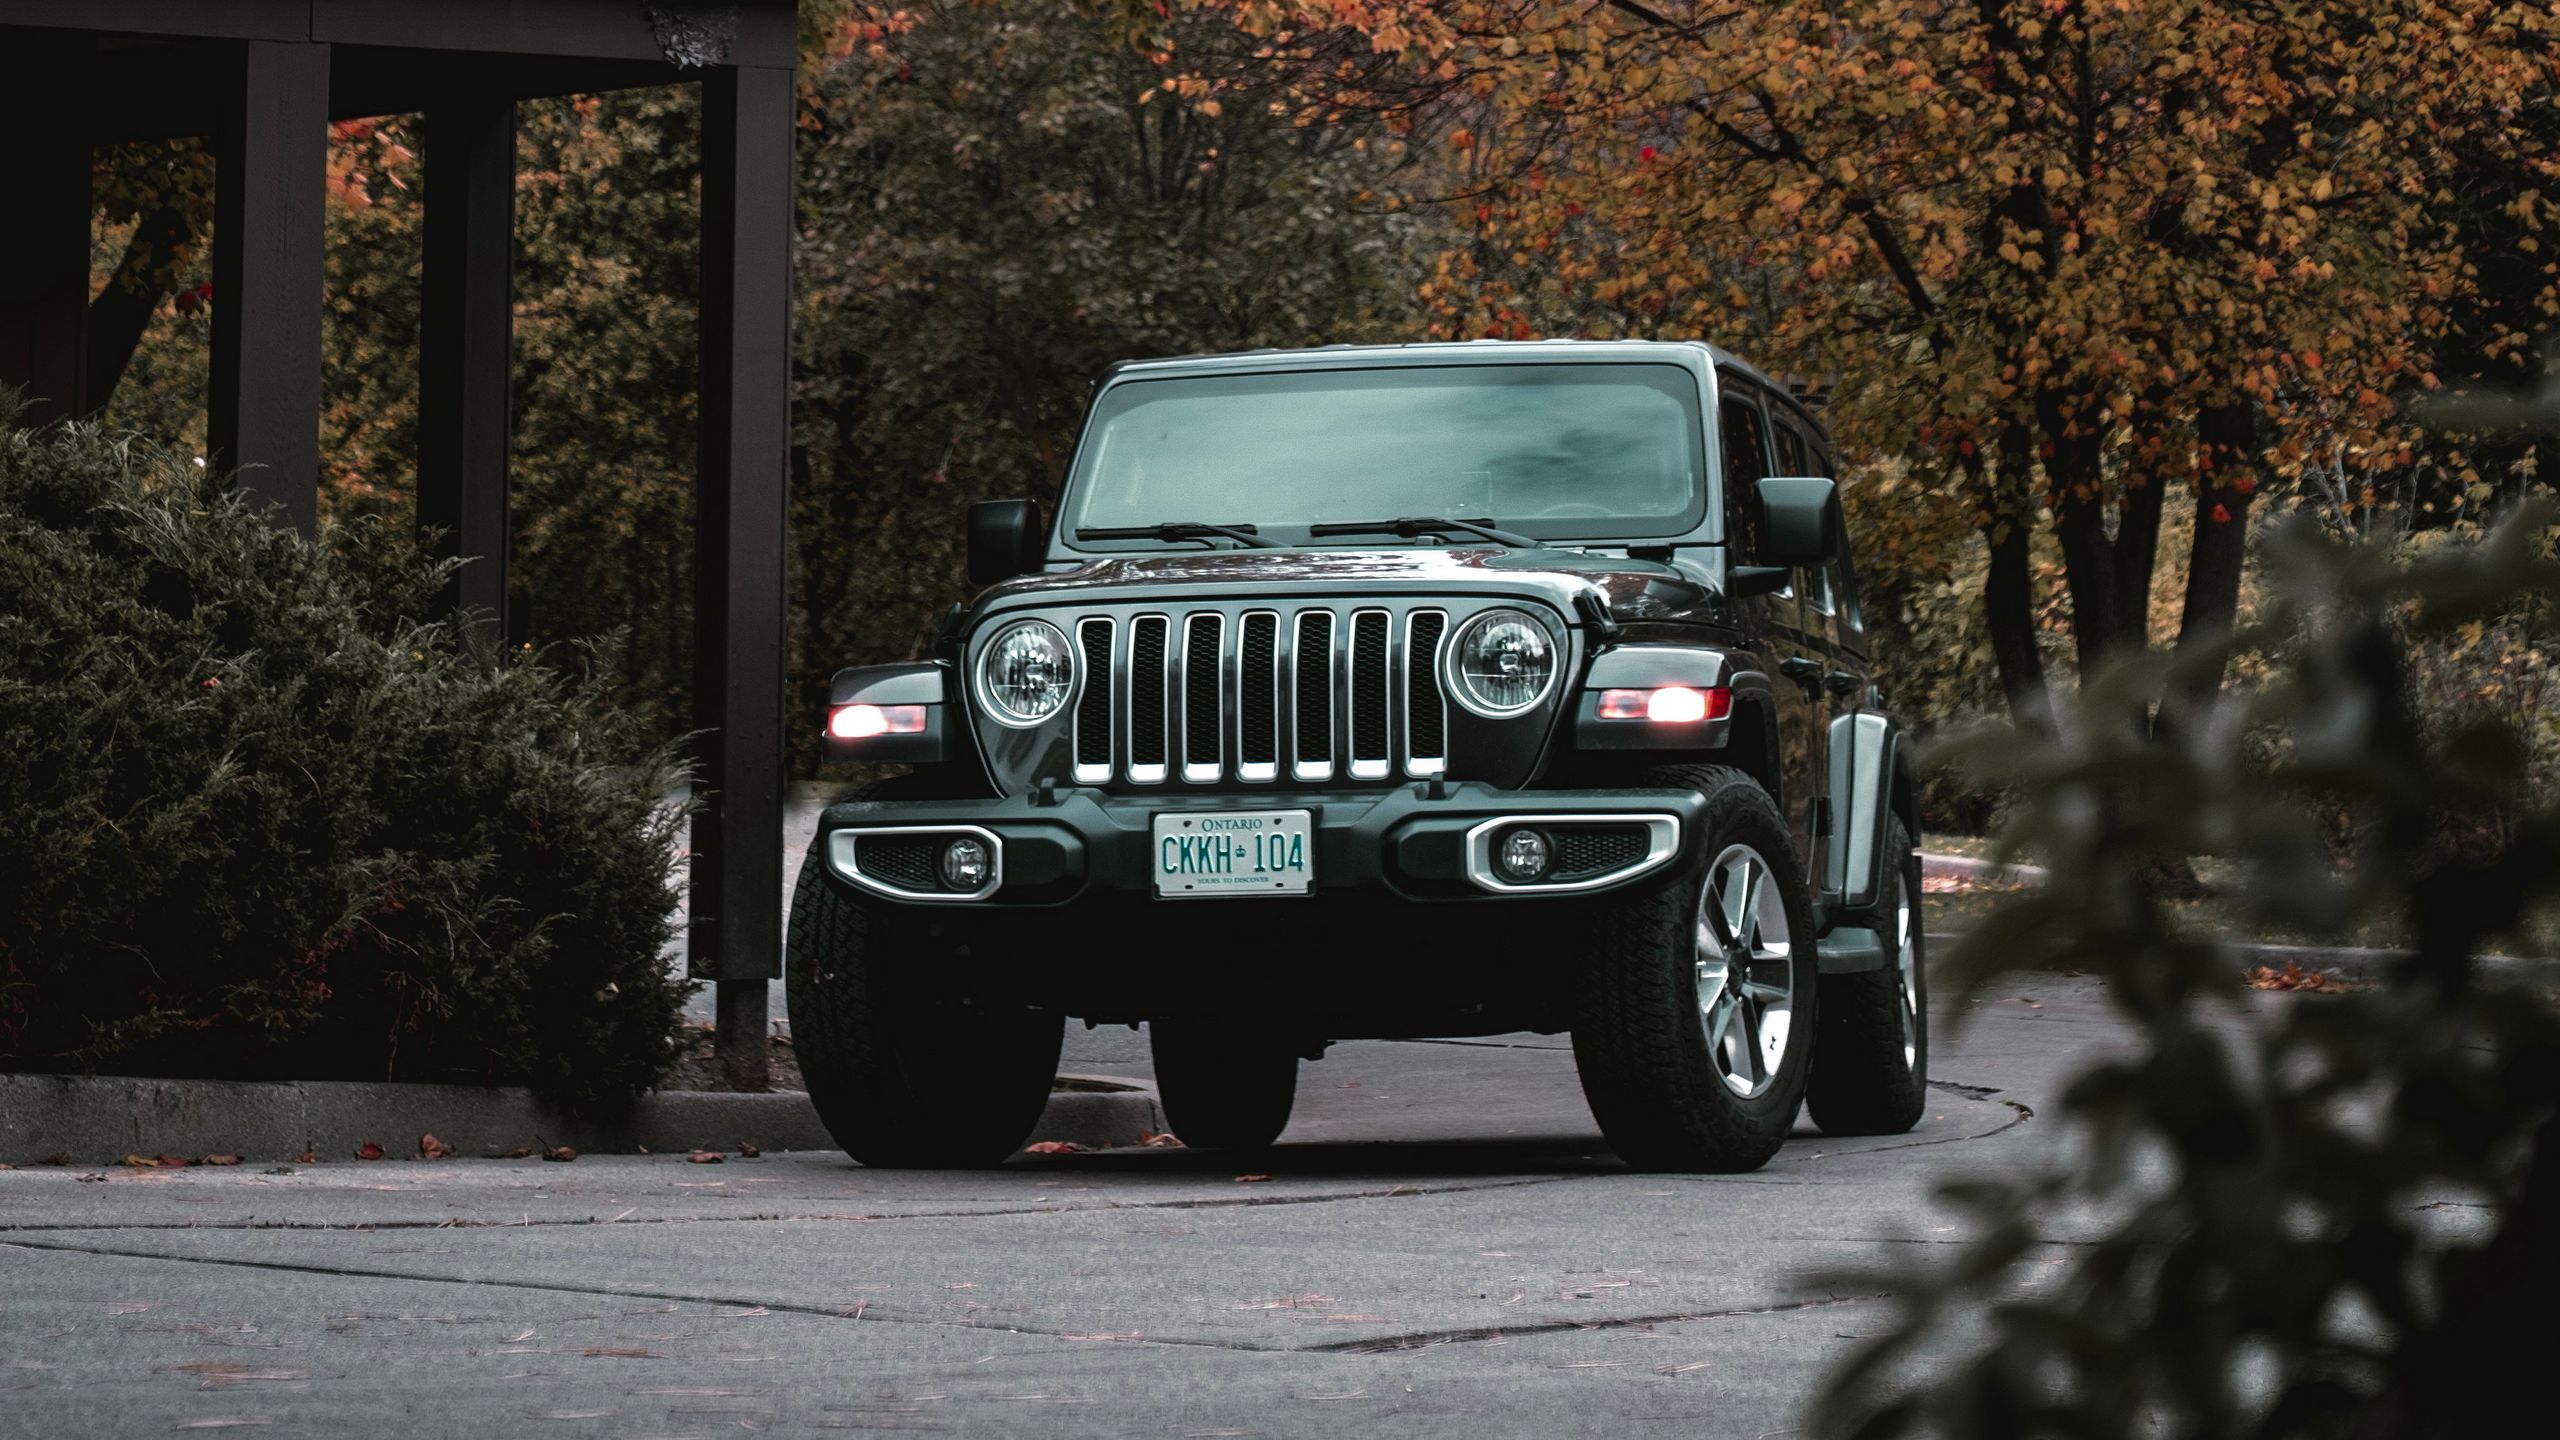 Download wallpaper 2560x1440 jeep wrangler, jeep, car, suv, black, front  view widescreen 16:9 hd background